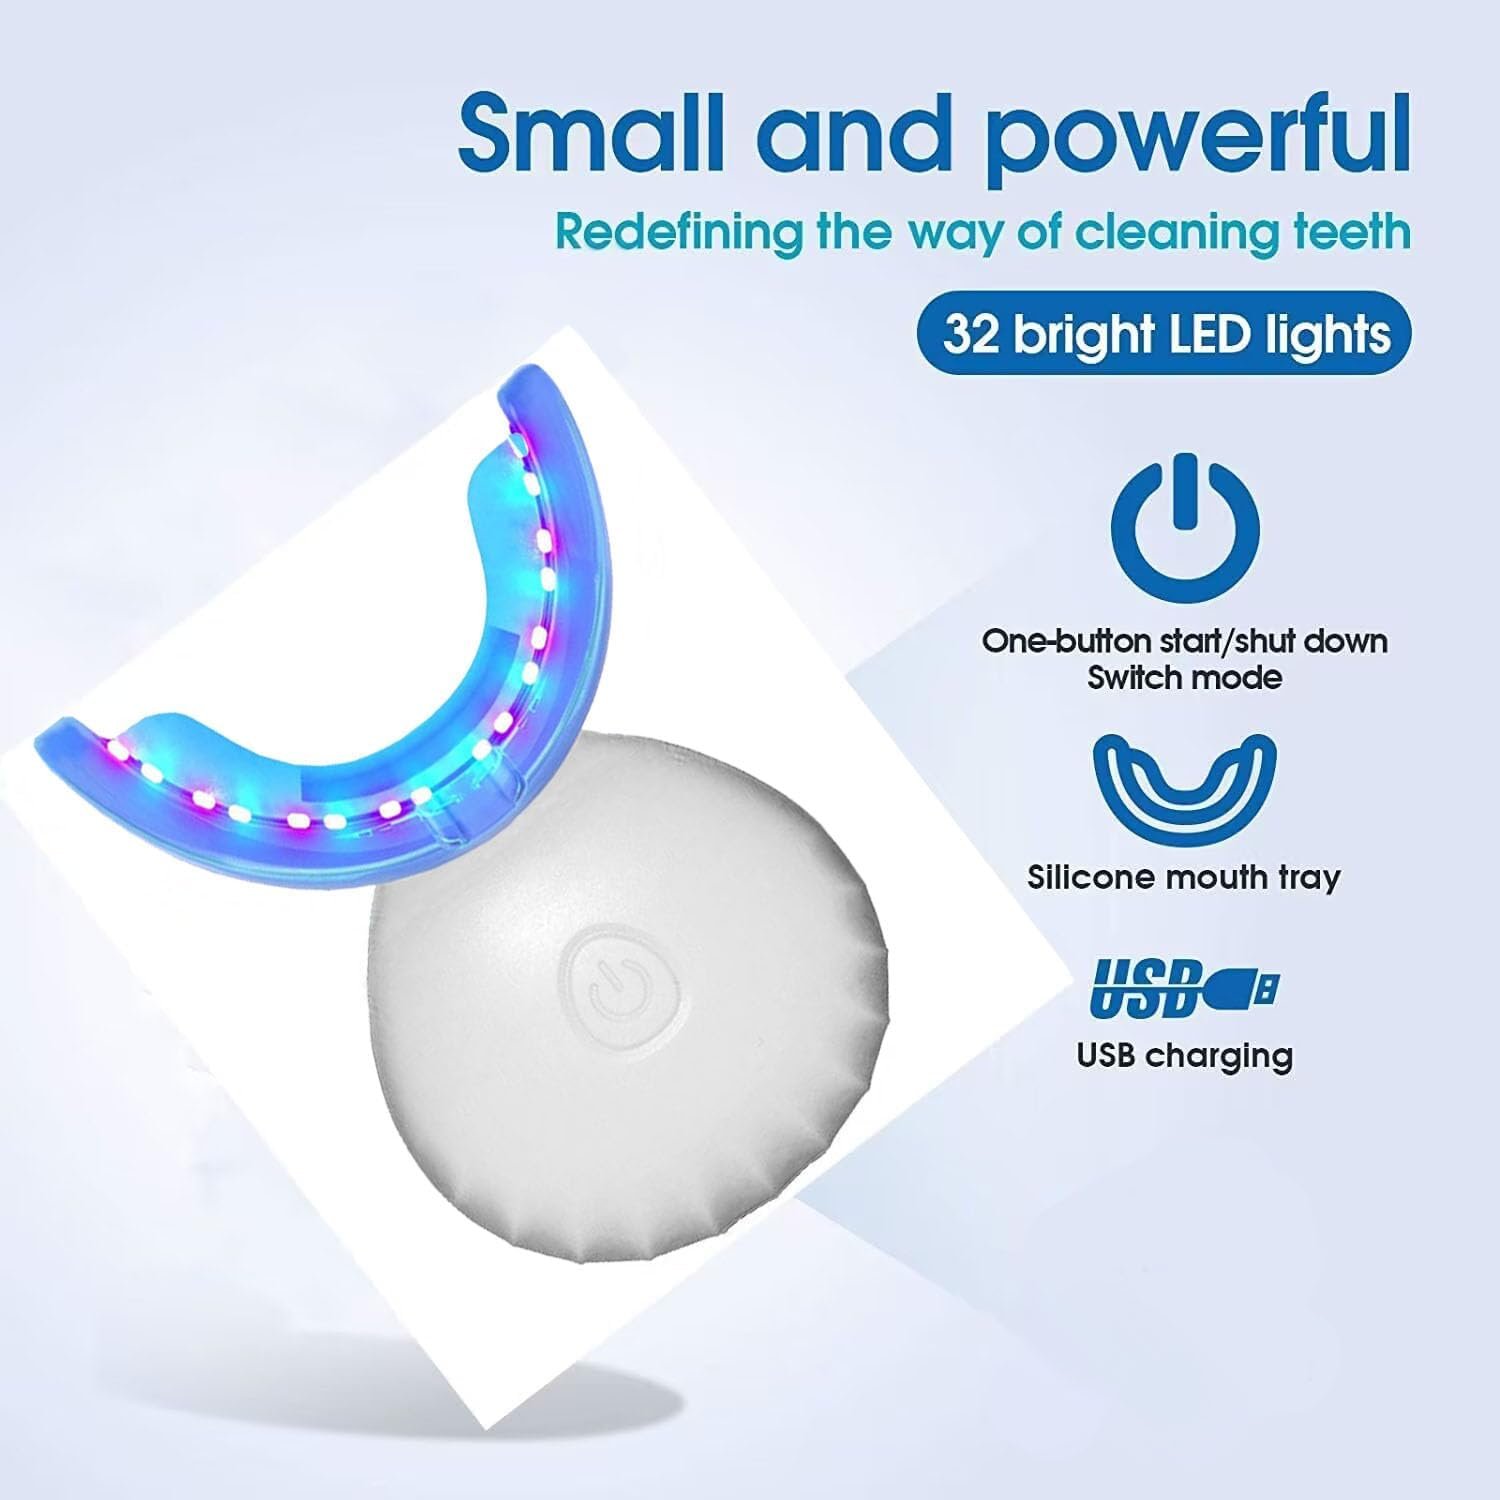 32LED Inductive Charging Tooth whitening System Teeth Bleaching Light-Accelerated BleachingTrays Kit with 16 Powerful Red  16Blue LED Lights (Black)